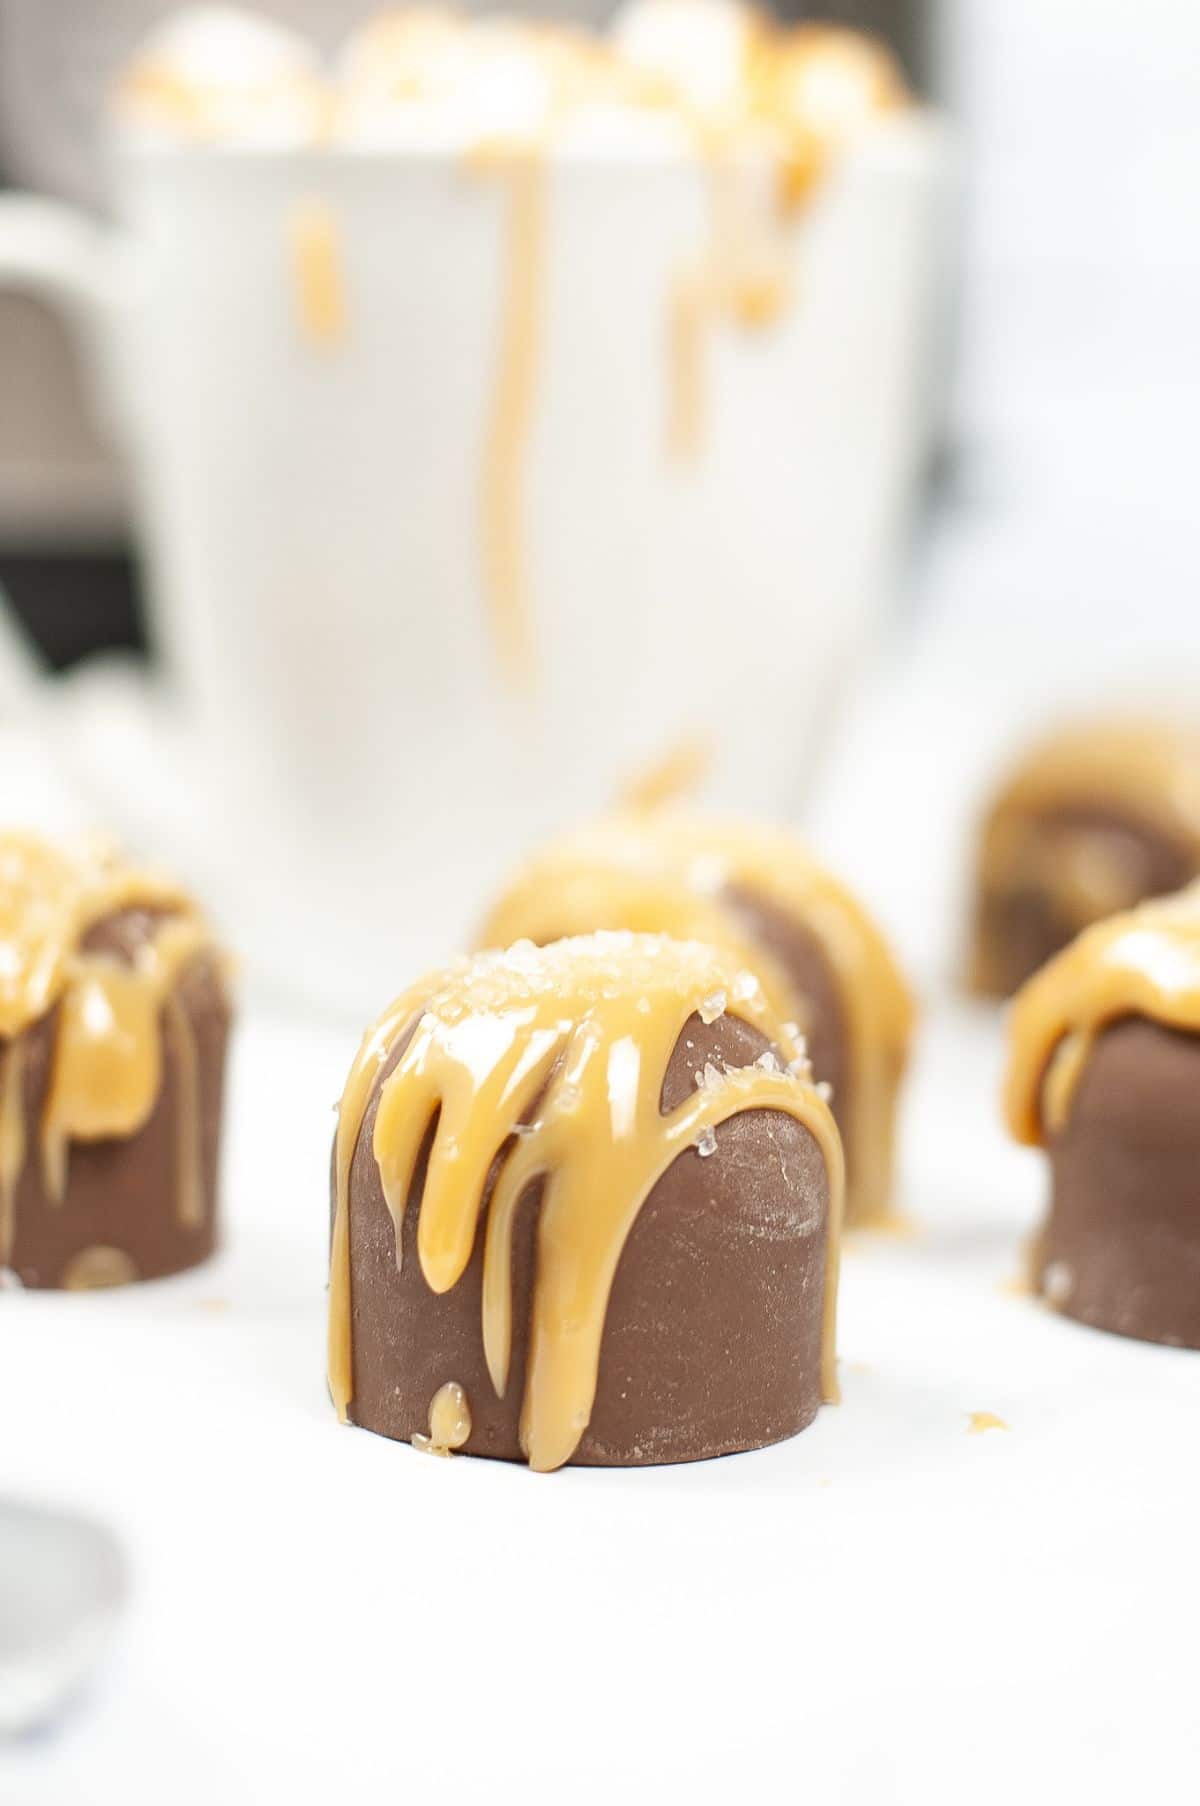 A vertical image of a batch of Instant Pot Salted Caramel Hot Cocoa Bombs, highlighting the salt and caramel toppings of the caramel bomb in front.